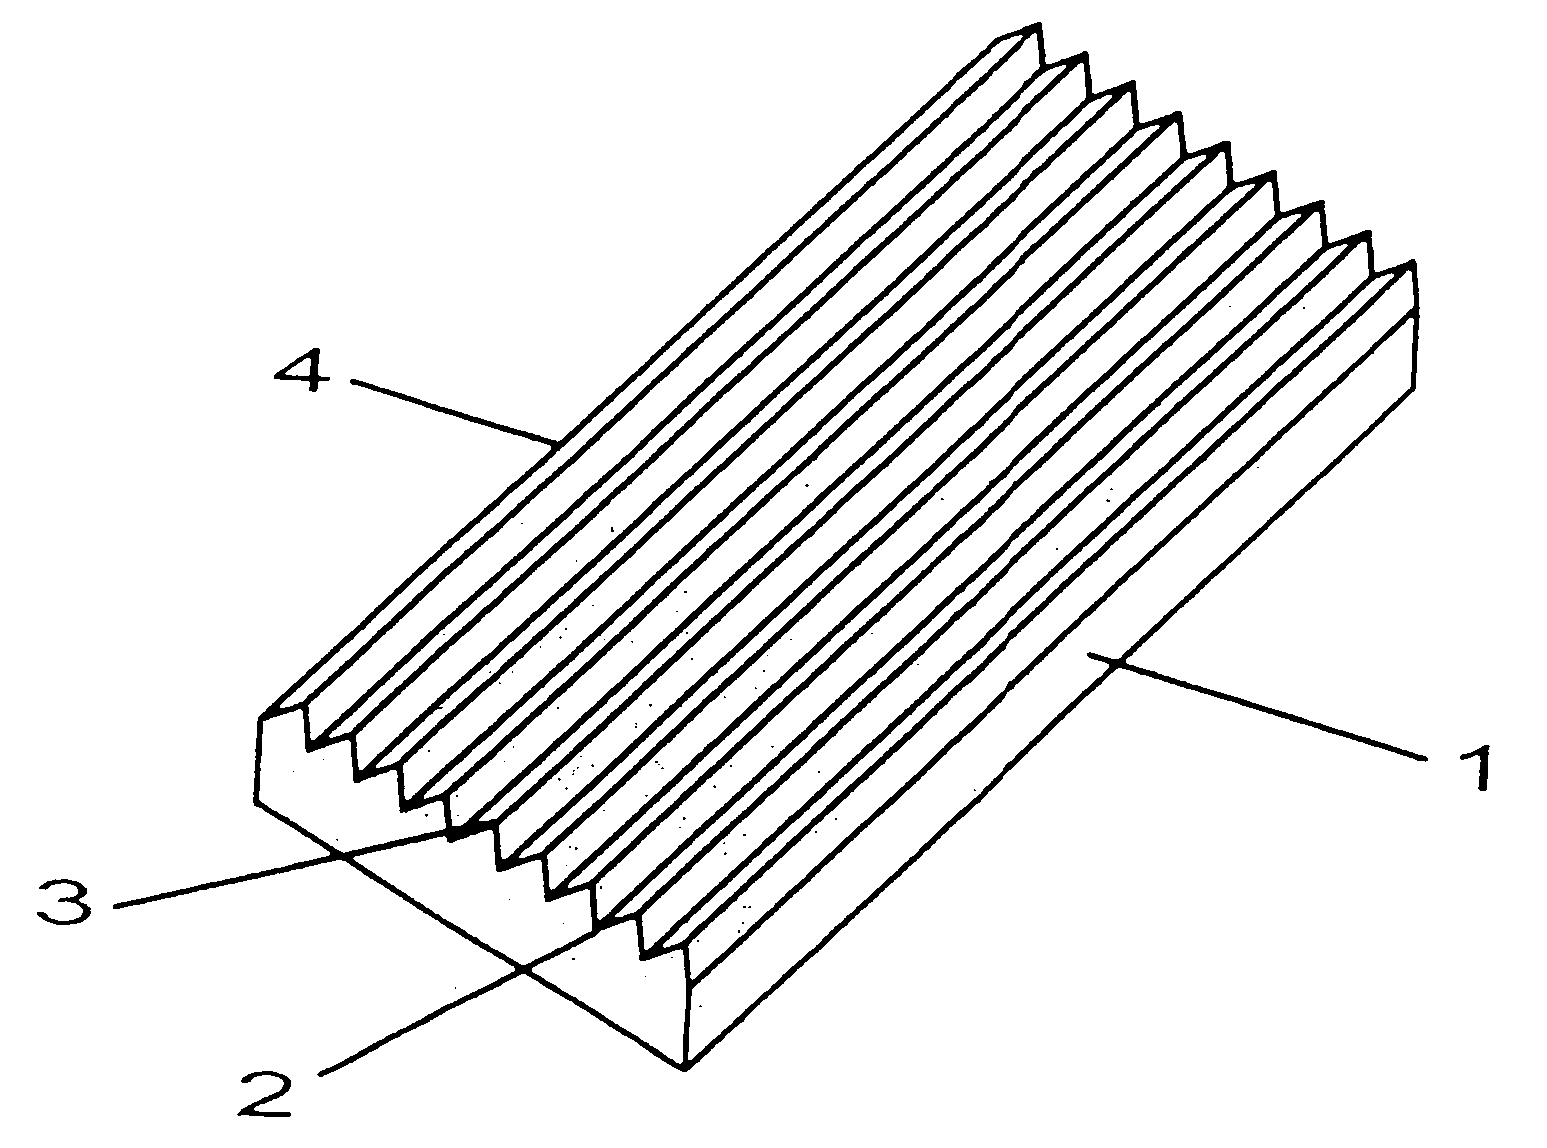 Method for shaping concrete blocks and/or concrete slabs